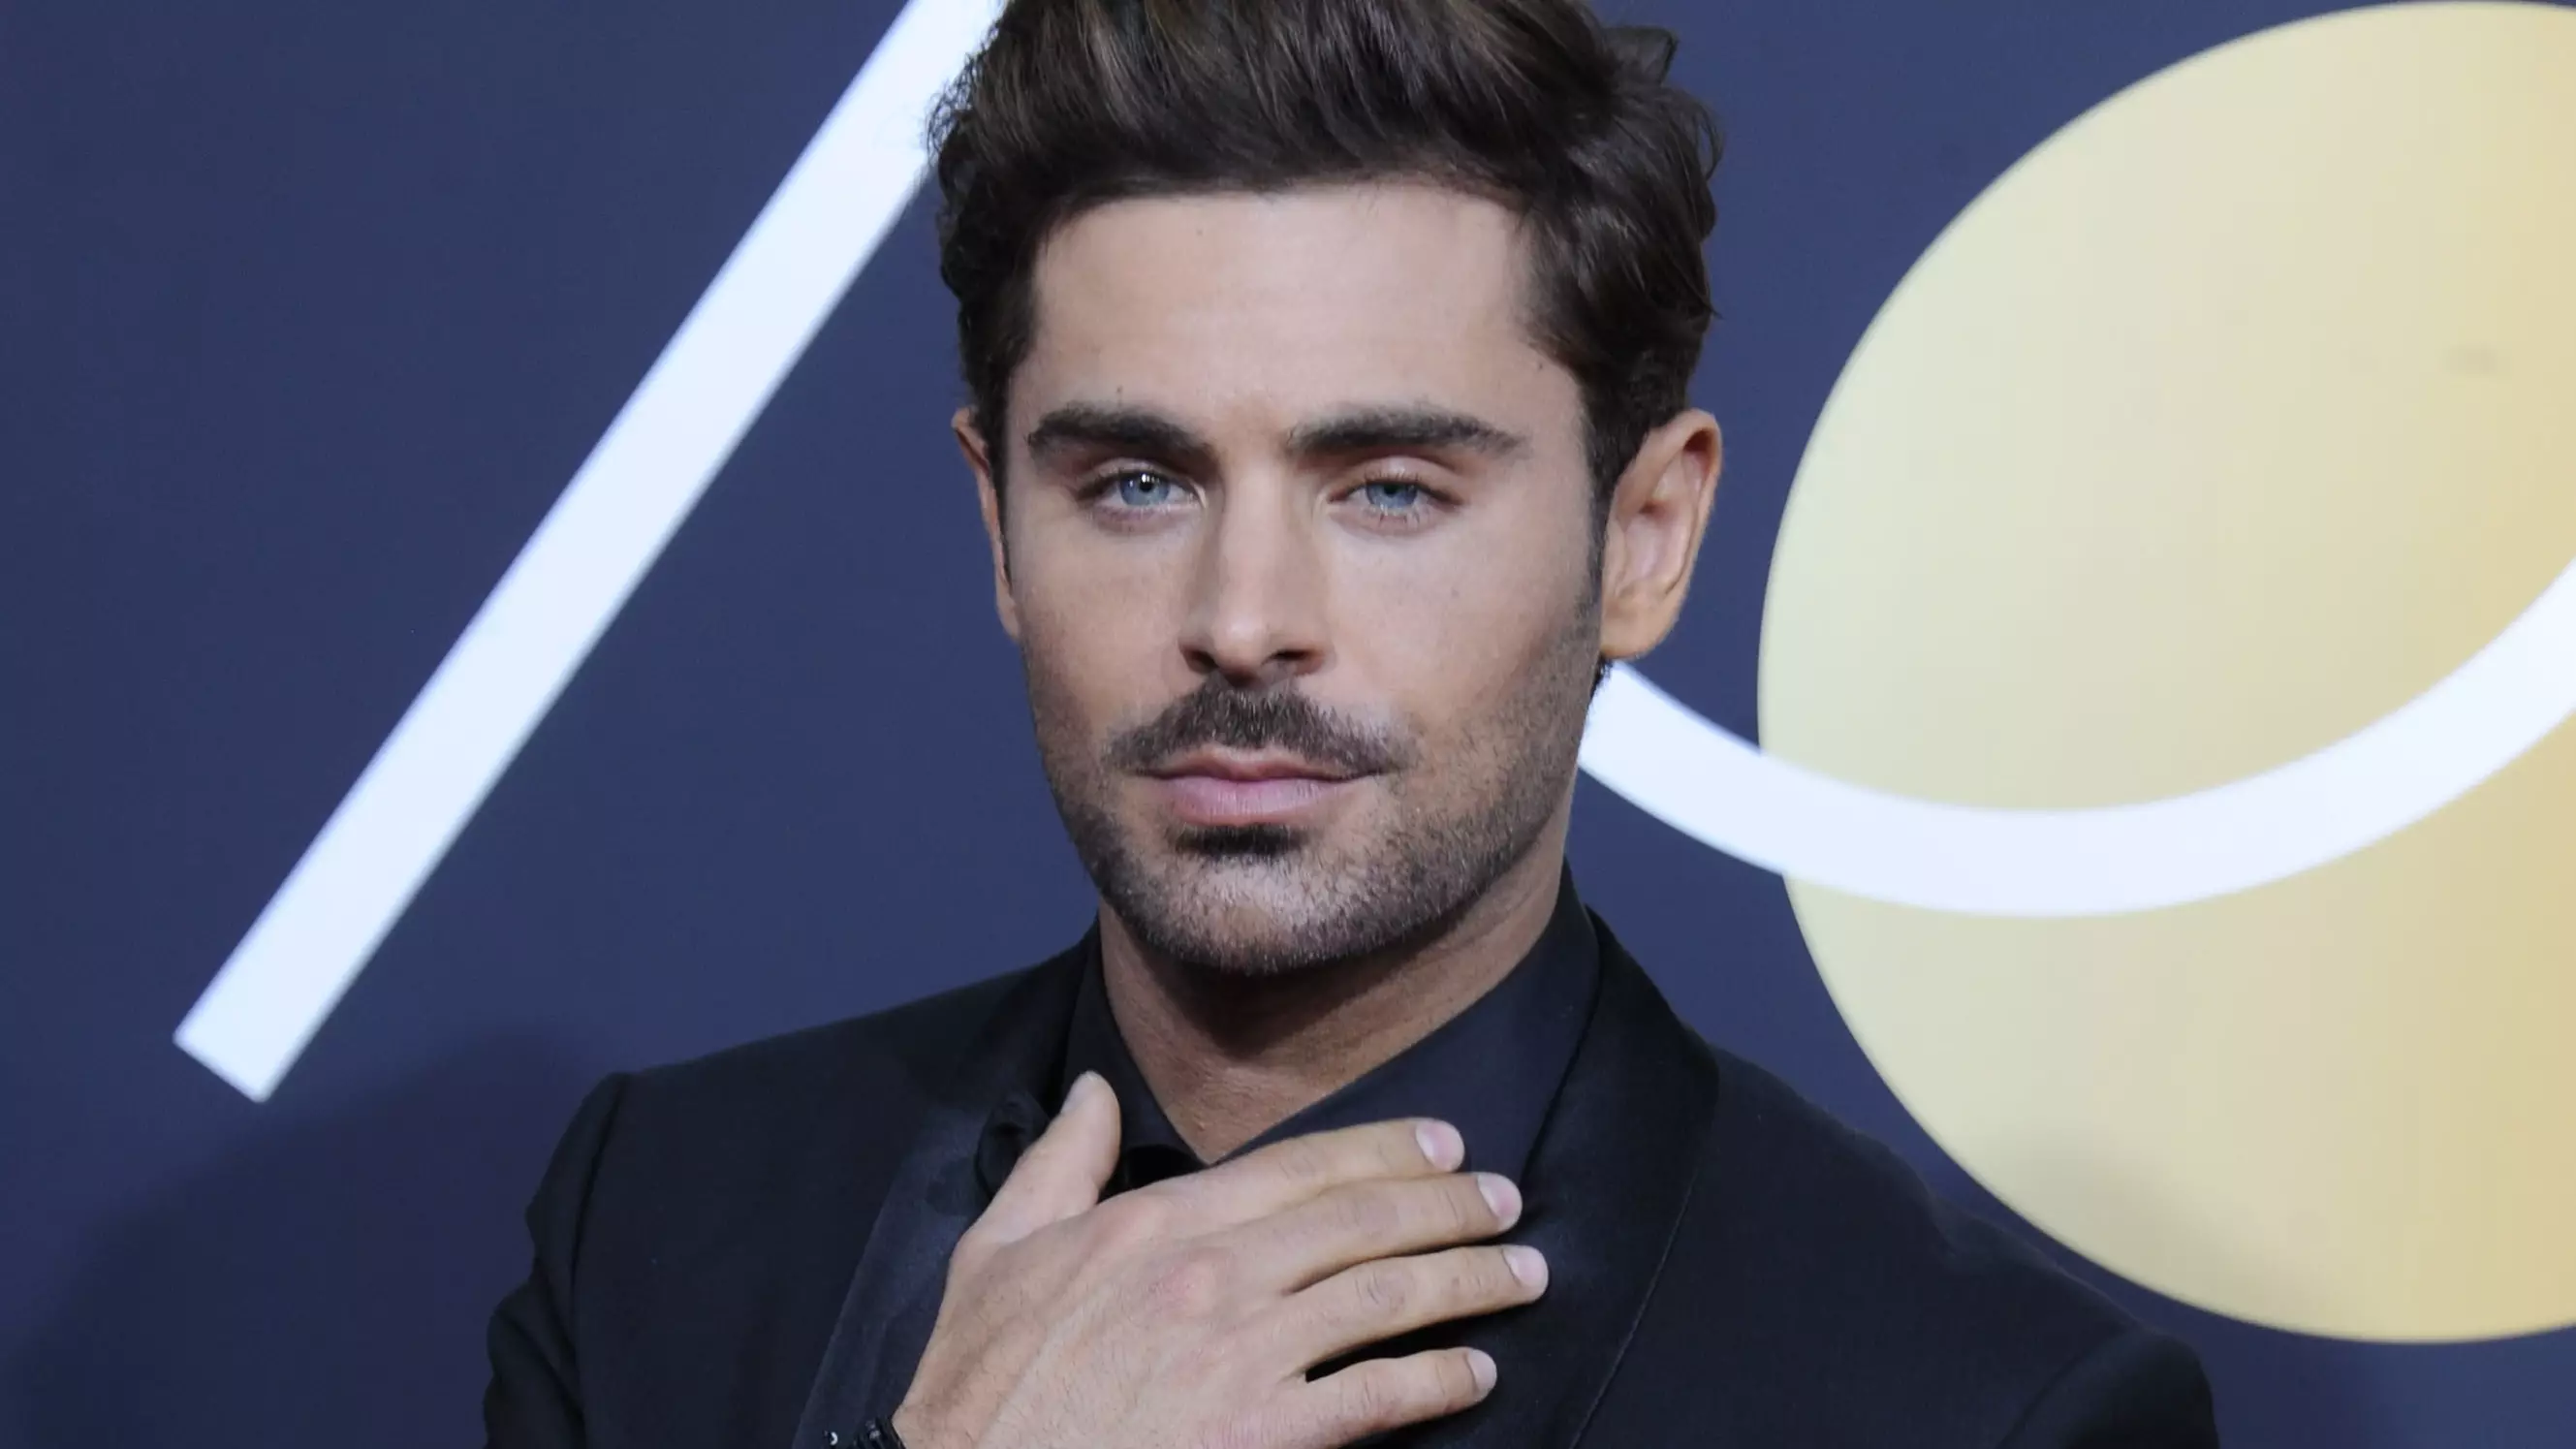 Zac Efron Has Dyed His Hair Platinum Blonde And It's His Strongest Look Yet